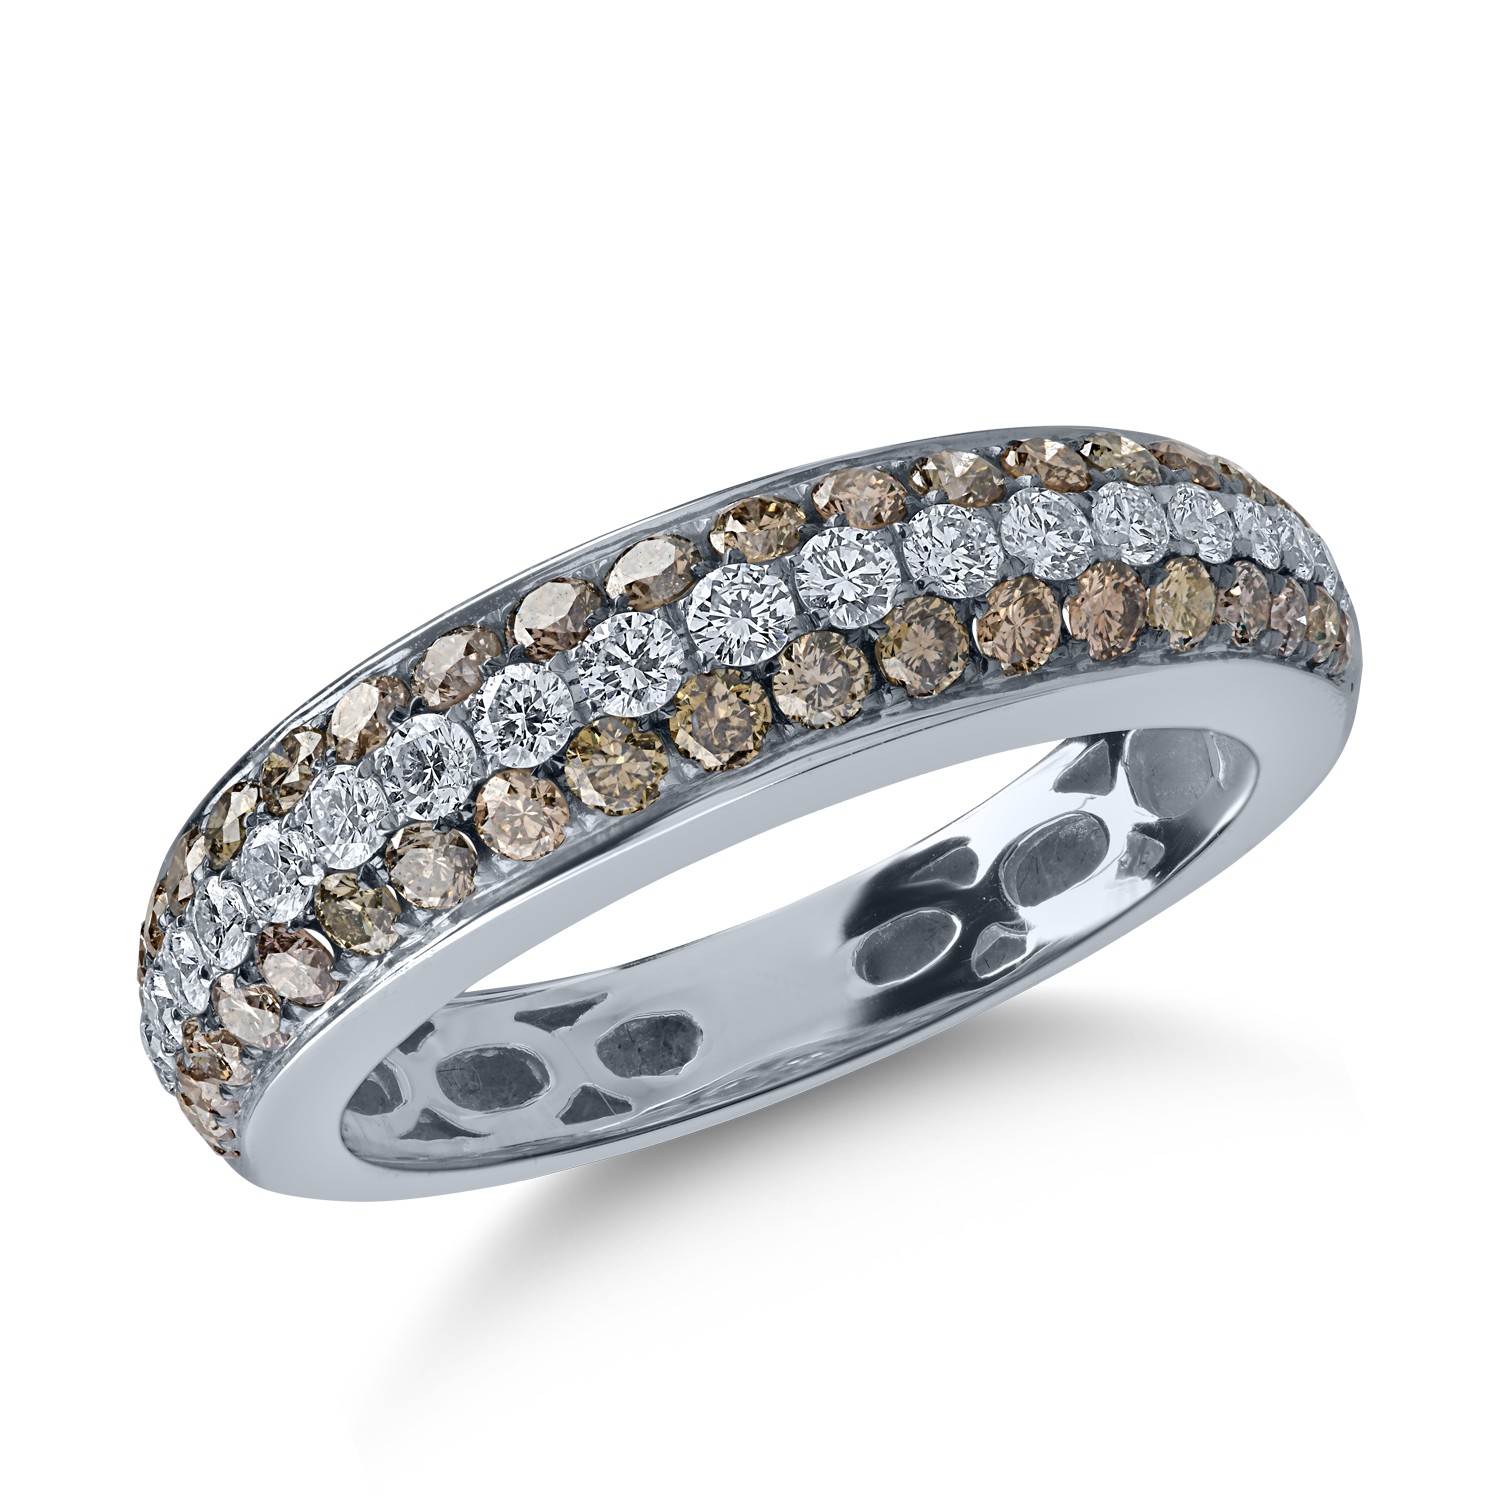 Half eternity ring in white gold with 0.63ct brown diamonds and 0.32ct clear diamonds